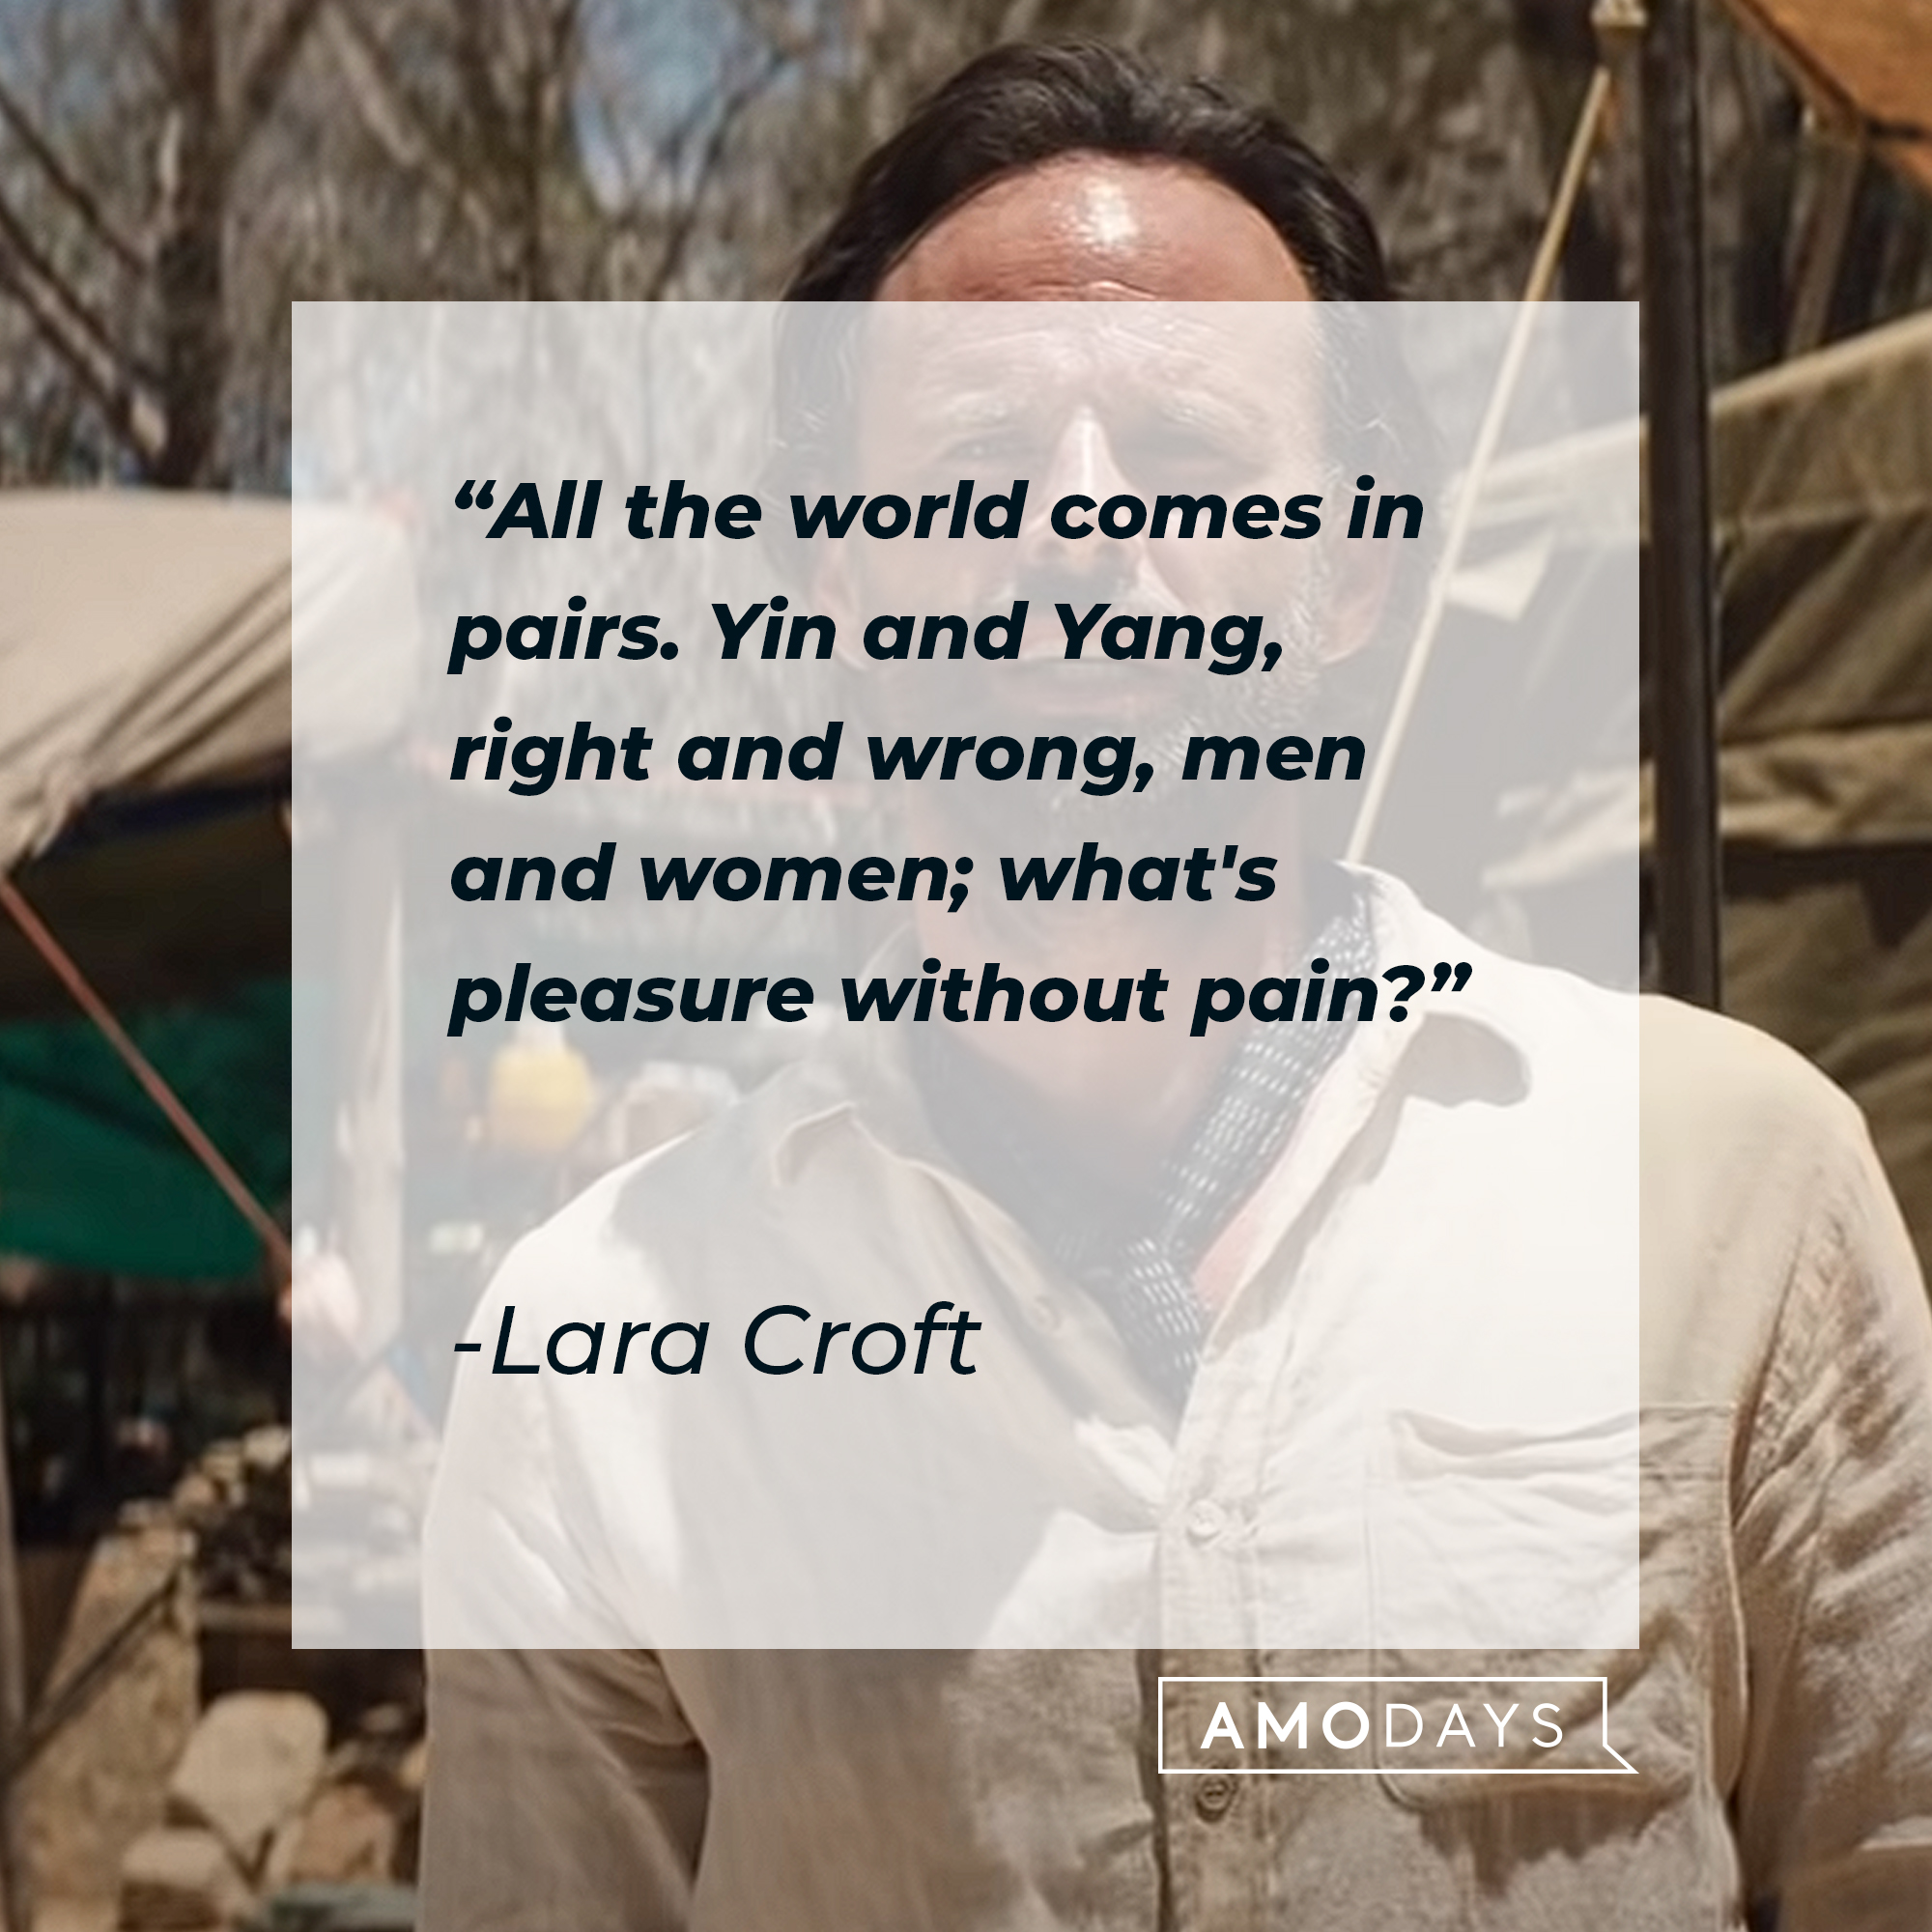 An image of  Mathias Vogel from the 2018 “Tombraider” movie with a Lara Croft quote: “All the world comes in pairs. Yin and Yang, right and wrong, men and women; what's pleasure without pain?” | Source: youtube.com/WarnerBrosPictures